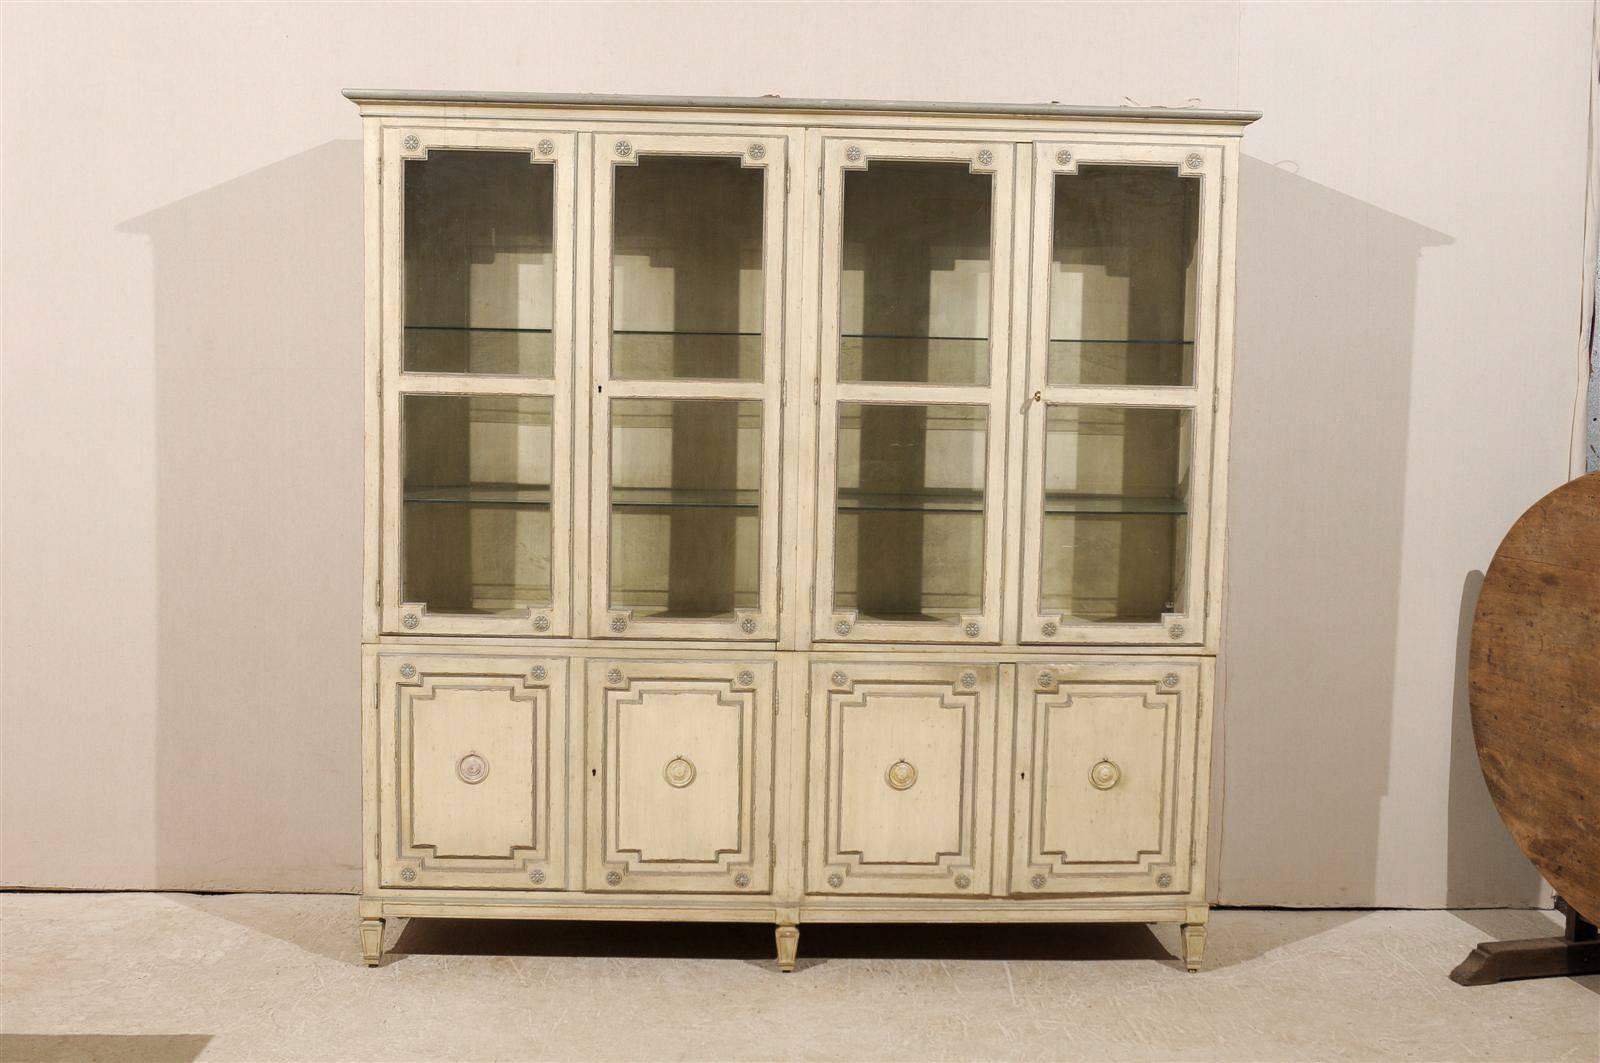 A vintage milling road large size painted wood cabinet with glass doors and shelves, sliding pull-out drawers and short spade feet by Milling Road Furniture. The linear profile of this painted wood cabinet/ bookcase is balanced by the discreet